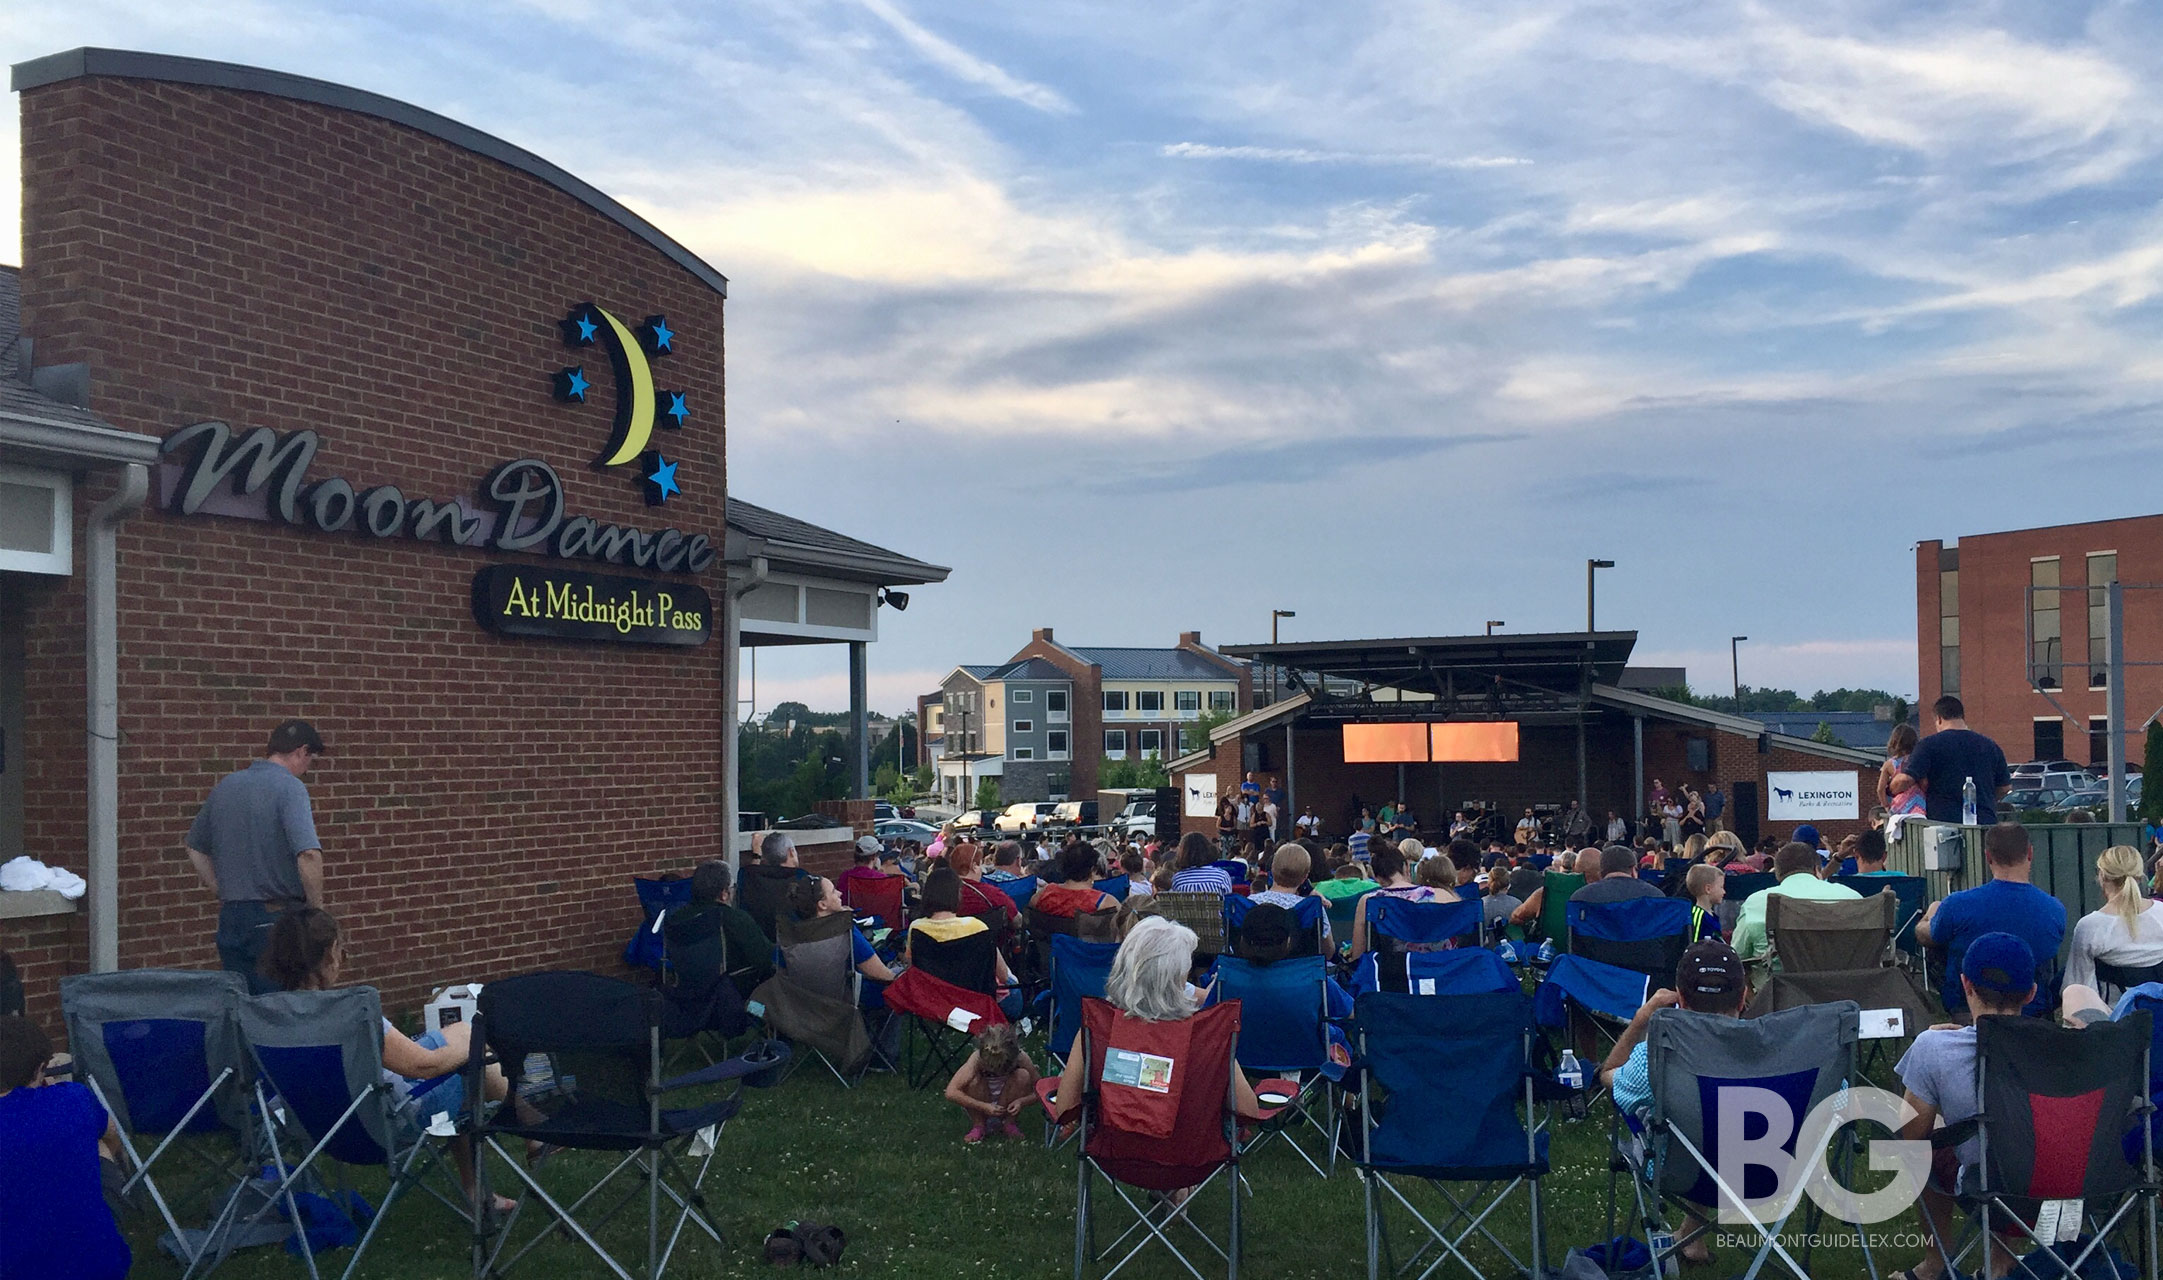 MoonDance Amphitheater will transfer ownership to the City of Lexington